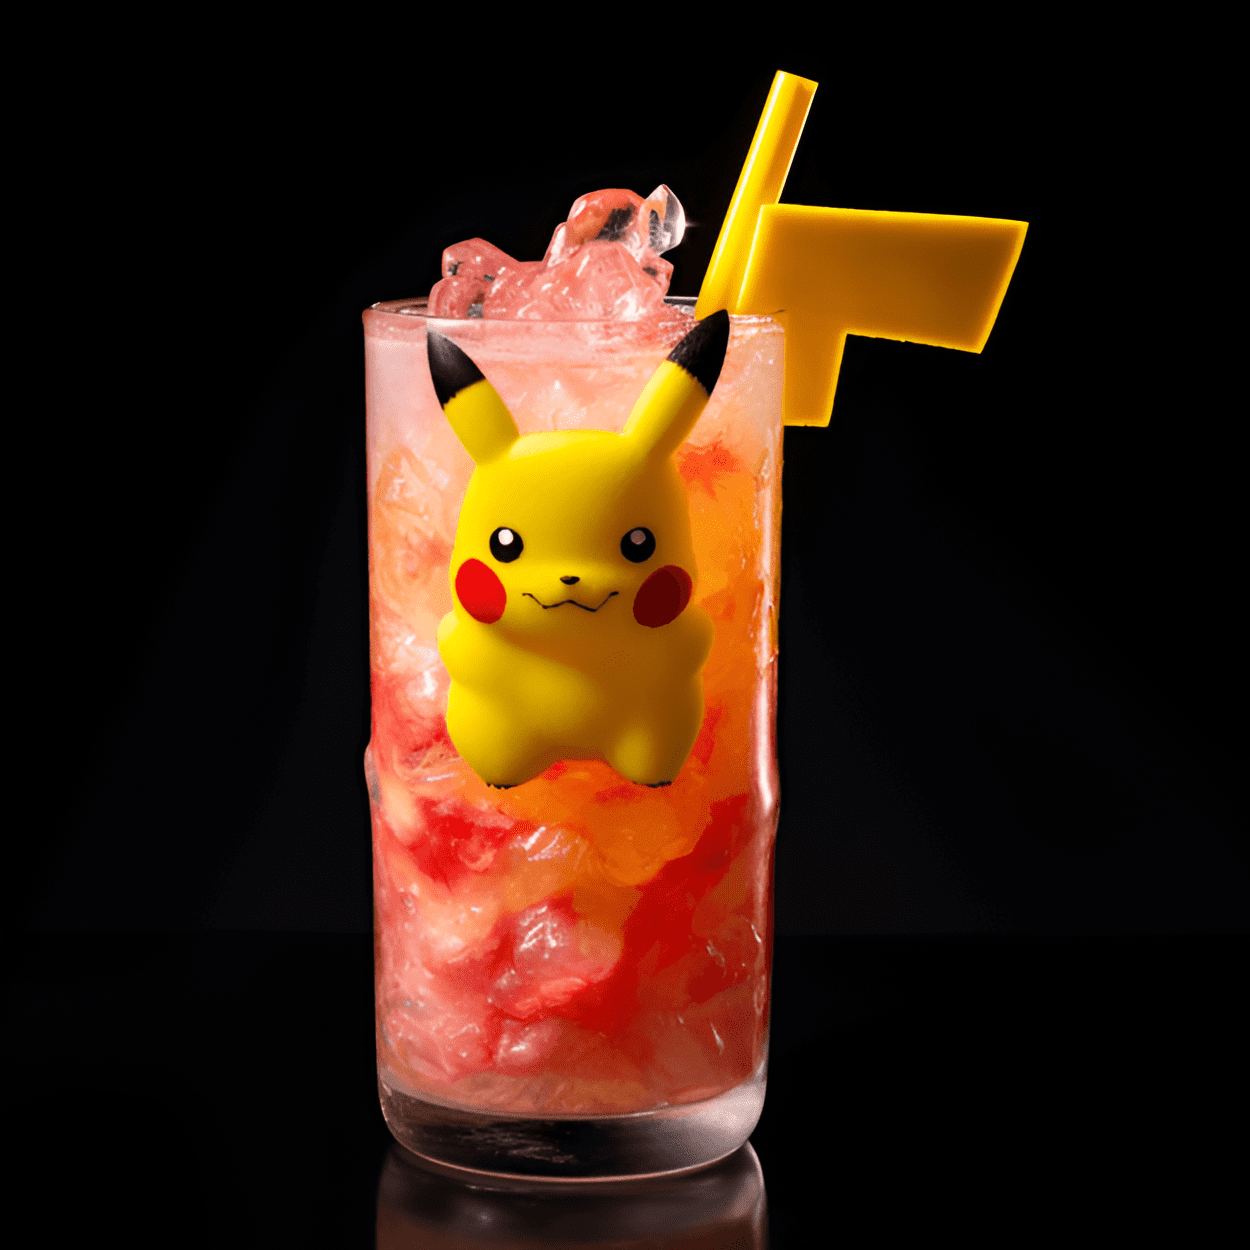 Pikachu Cocktail Recipe - The Pikachu Cocktail is a sweet and fruity concoction. The pineapple juice and coconut rum give it a tropical twist, while the grenadine adds a hint of tartness. The overall taste is refreshing, light, and perfect for a summer day.